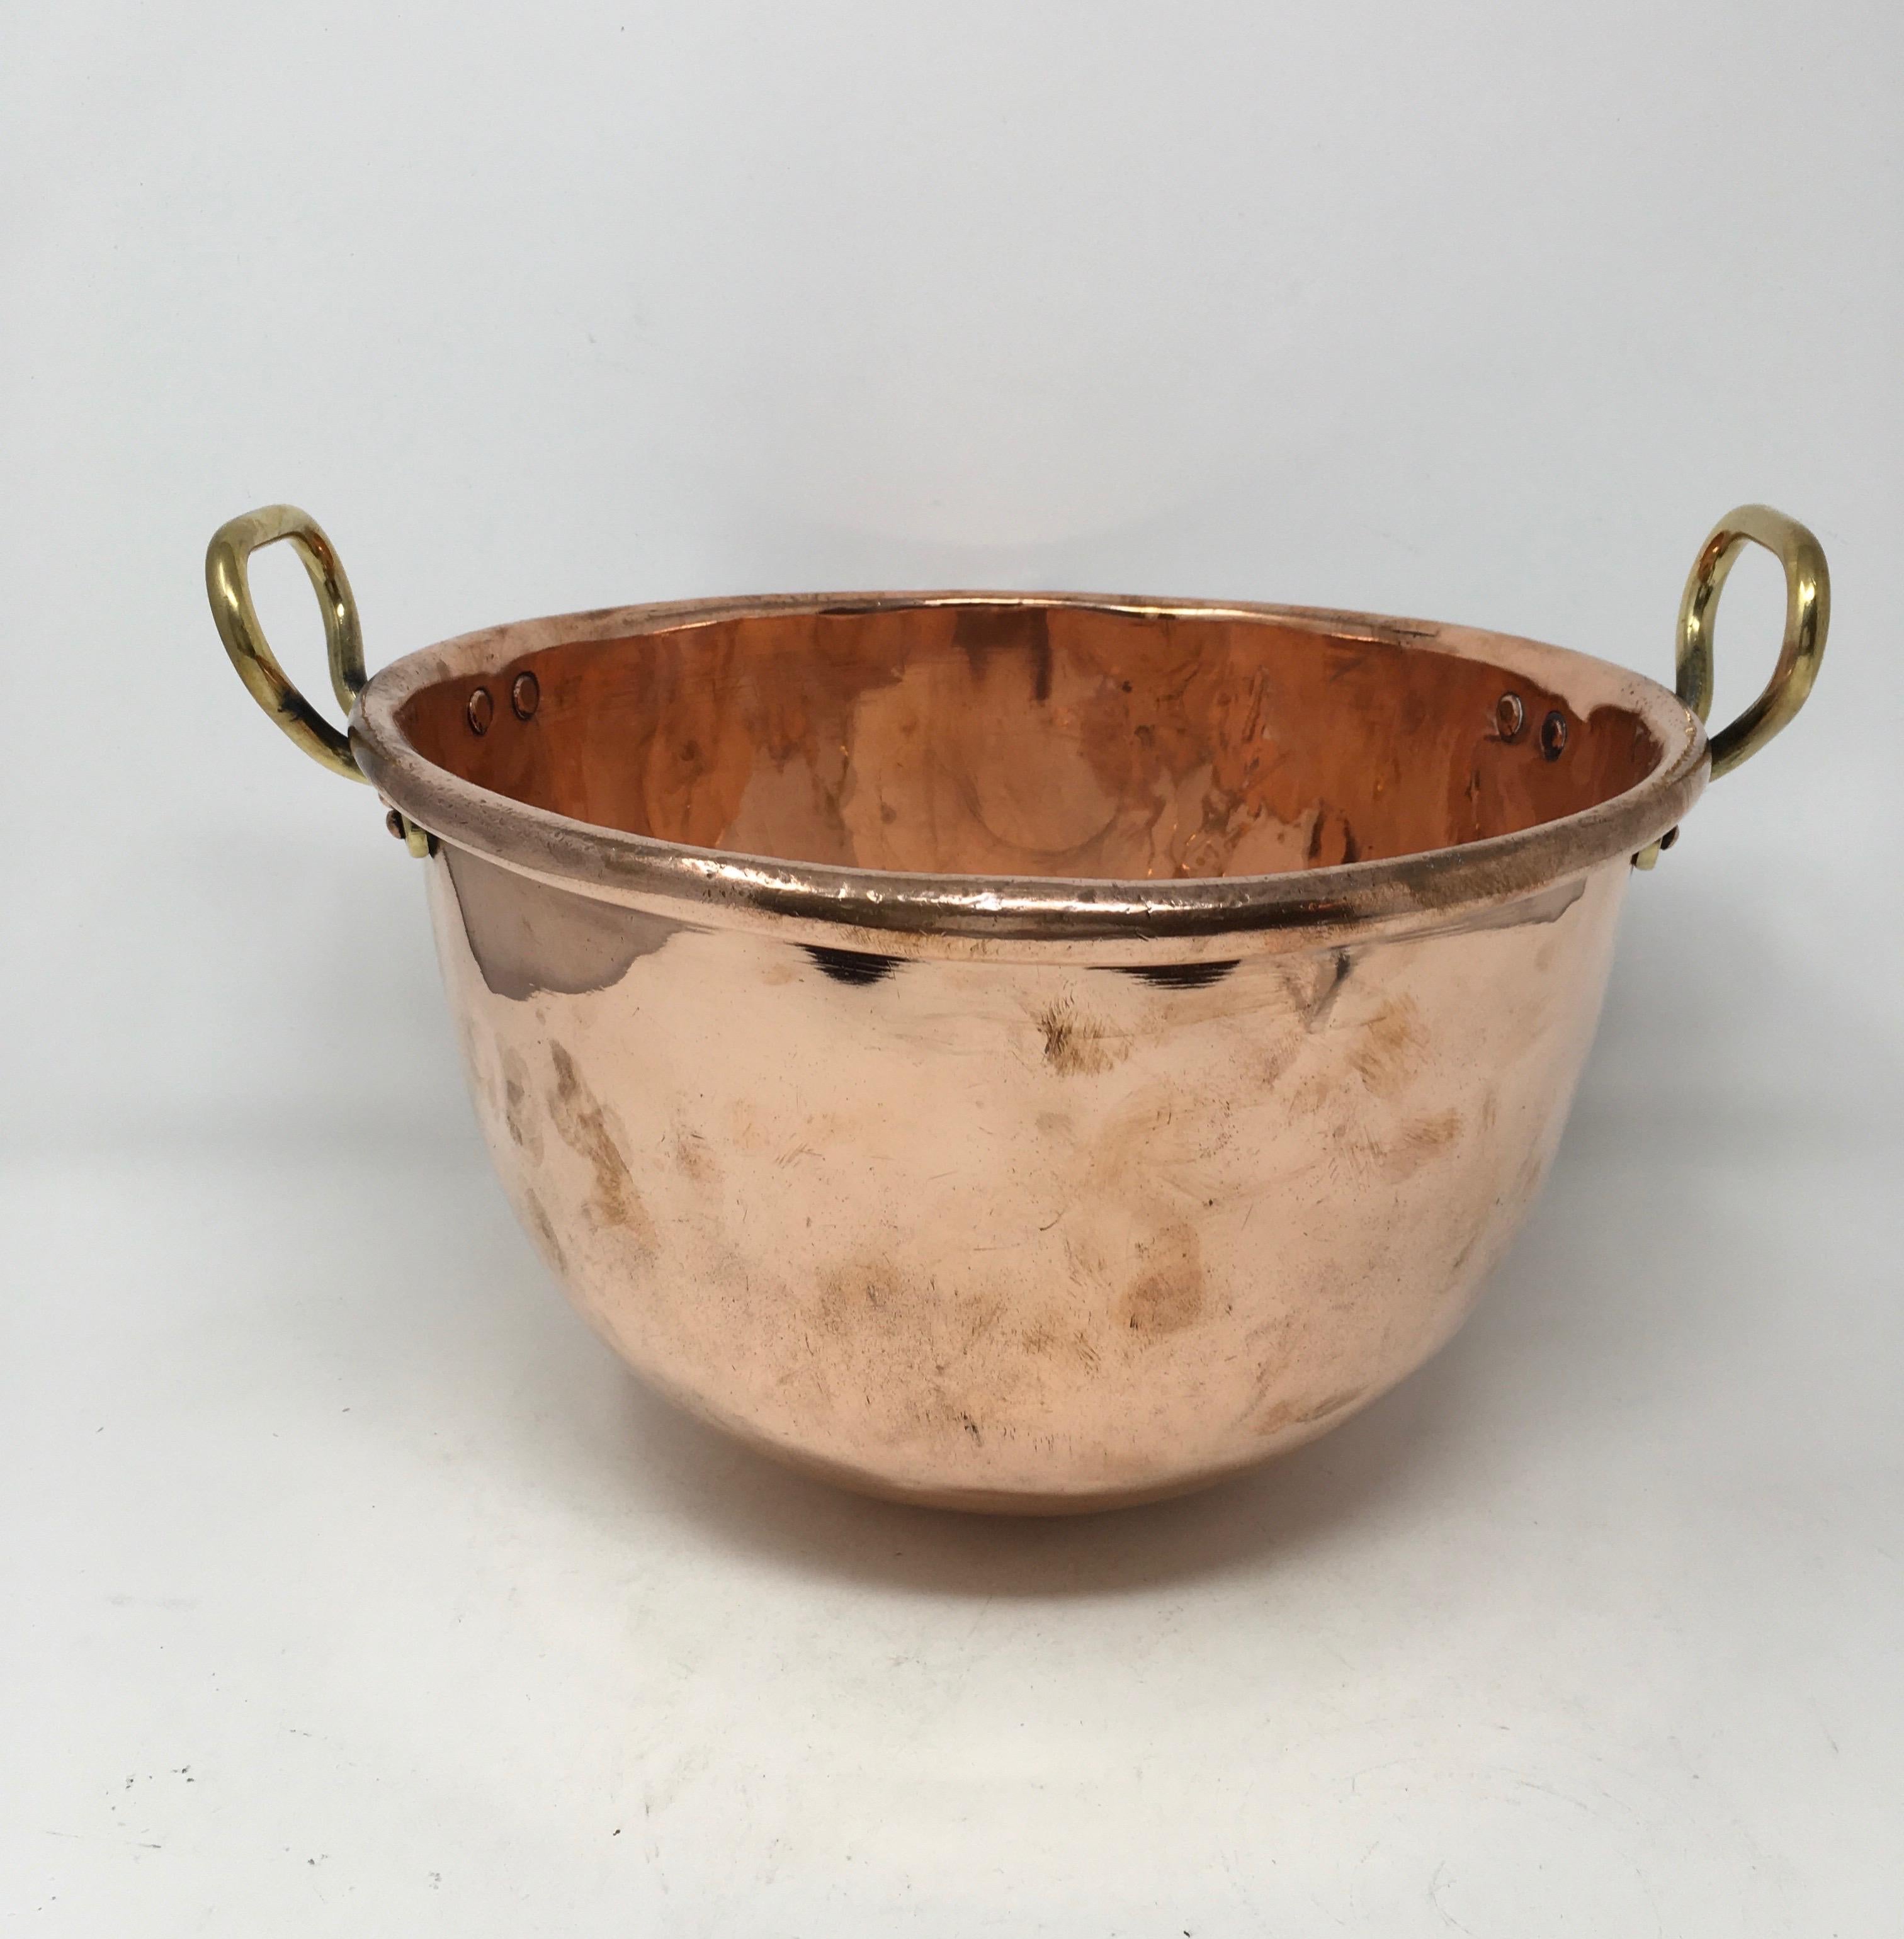 Large copper mixing bowl with brass loop handle. Found in England. This beautiful copper bowl will make a nice addition to any kitchen decor. Measures: 11